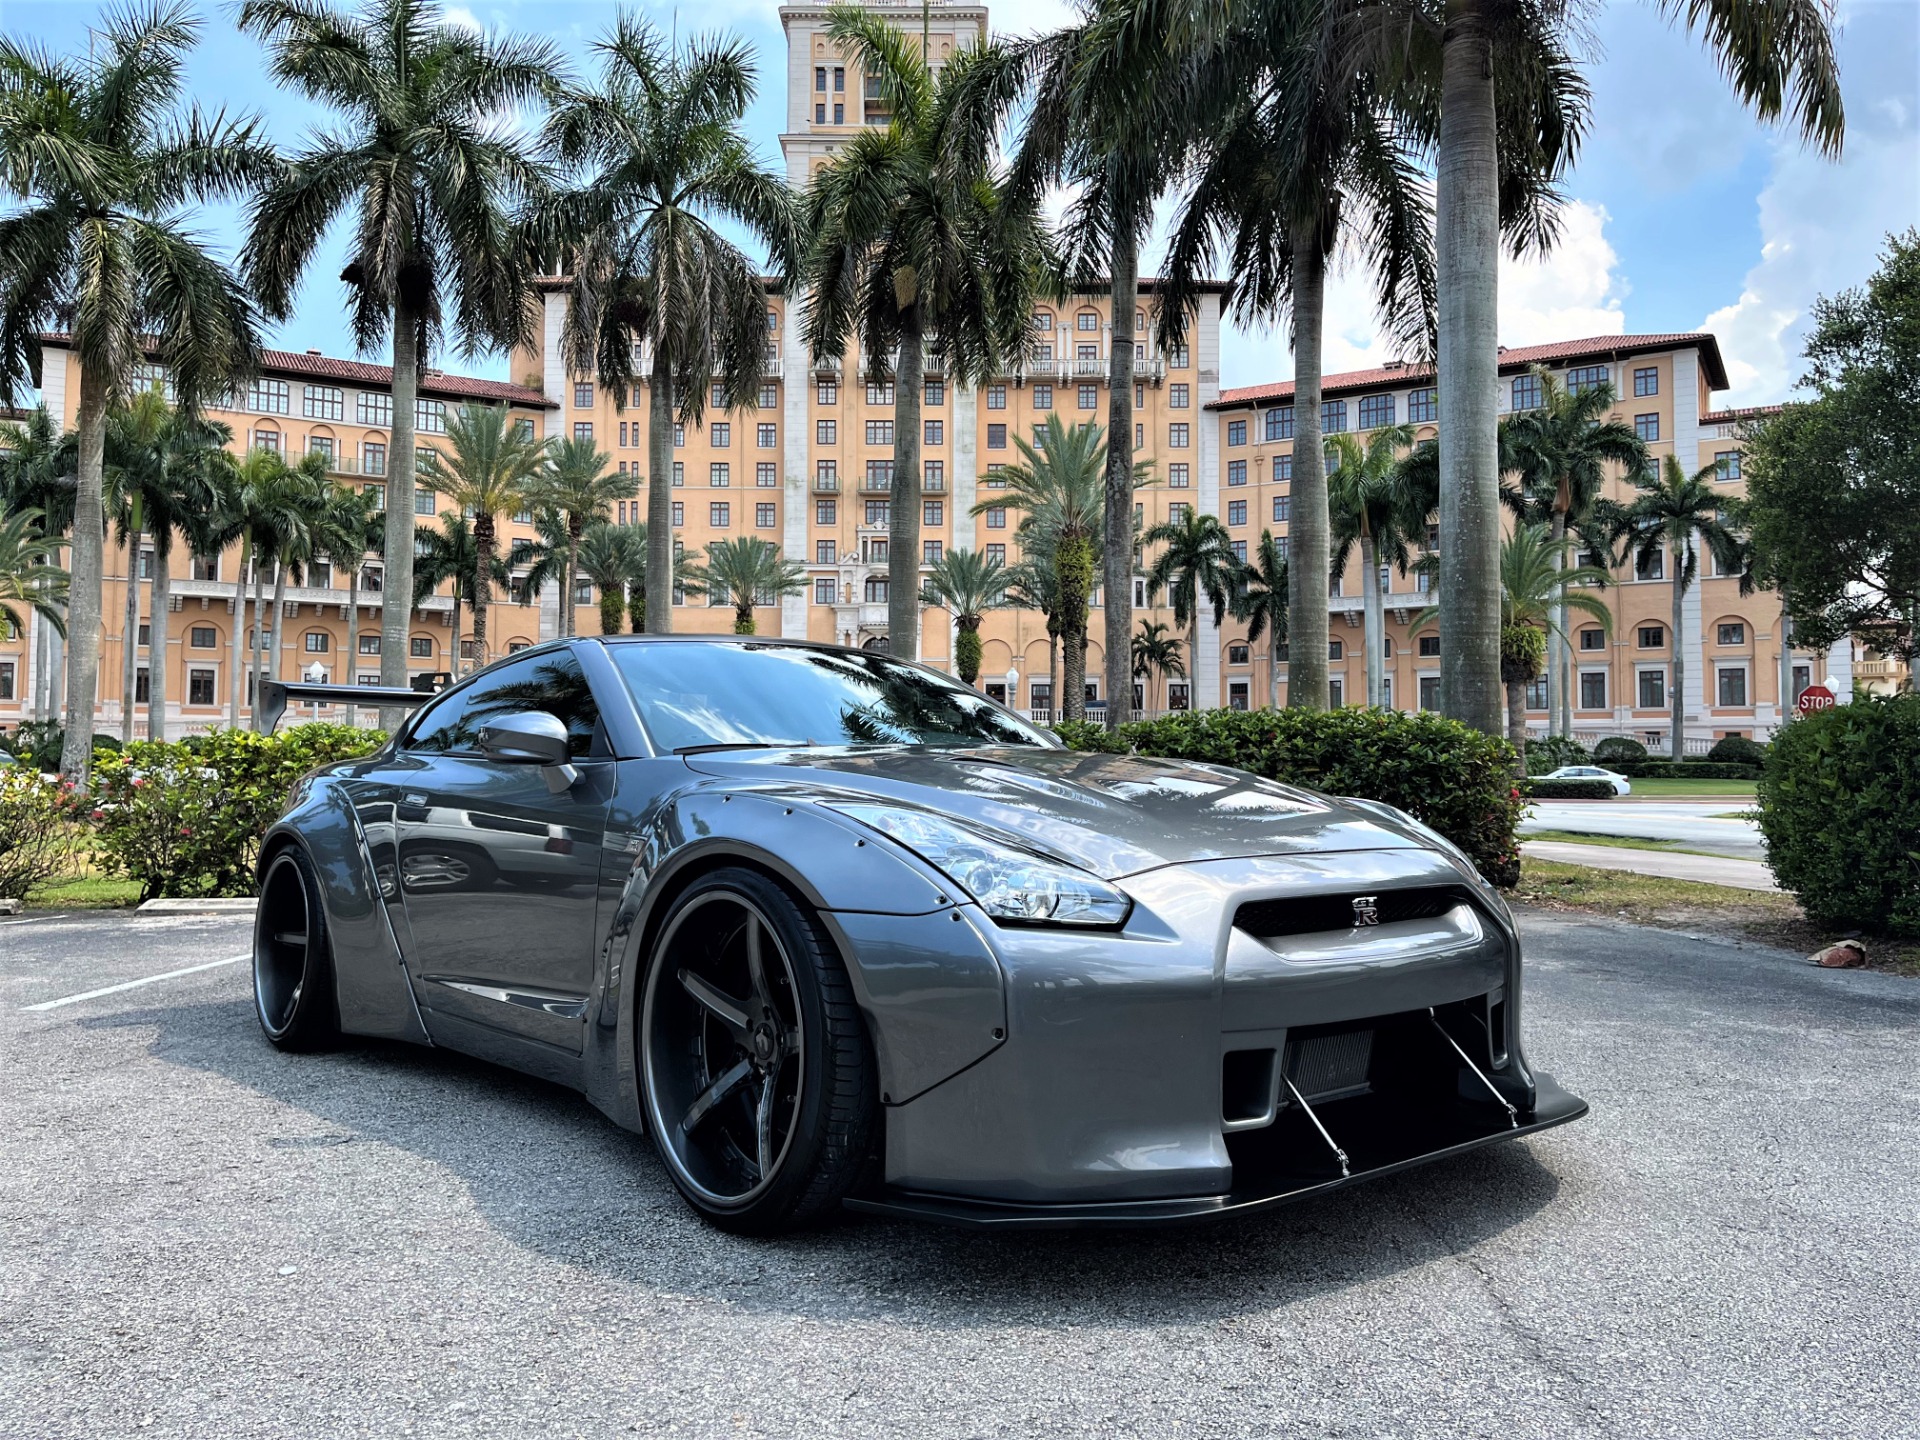 Used 2014 Nissan GT-R Track Edition for sale Sold at The Gables Sports Cars in Miami FL 33146 2